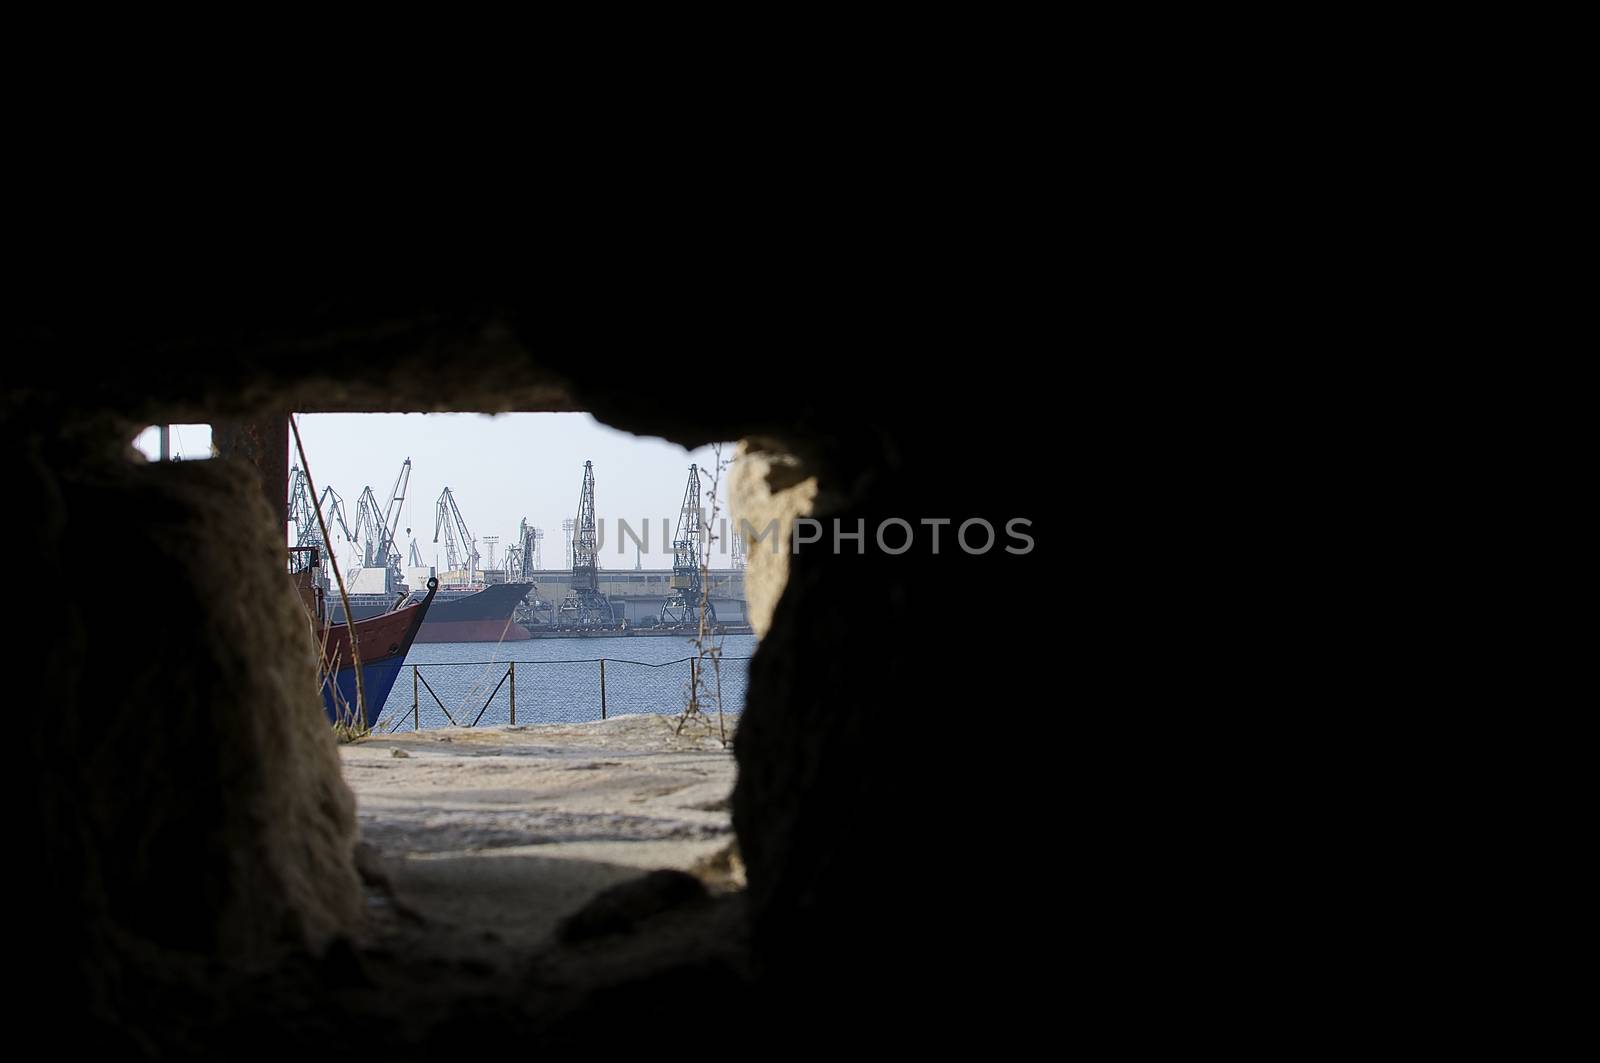 Through the hole by Roger0047